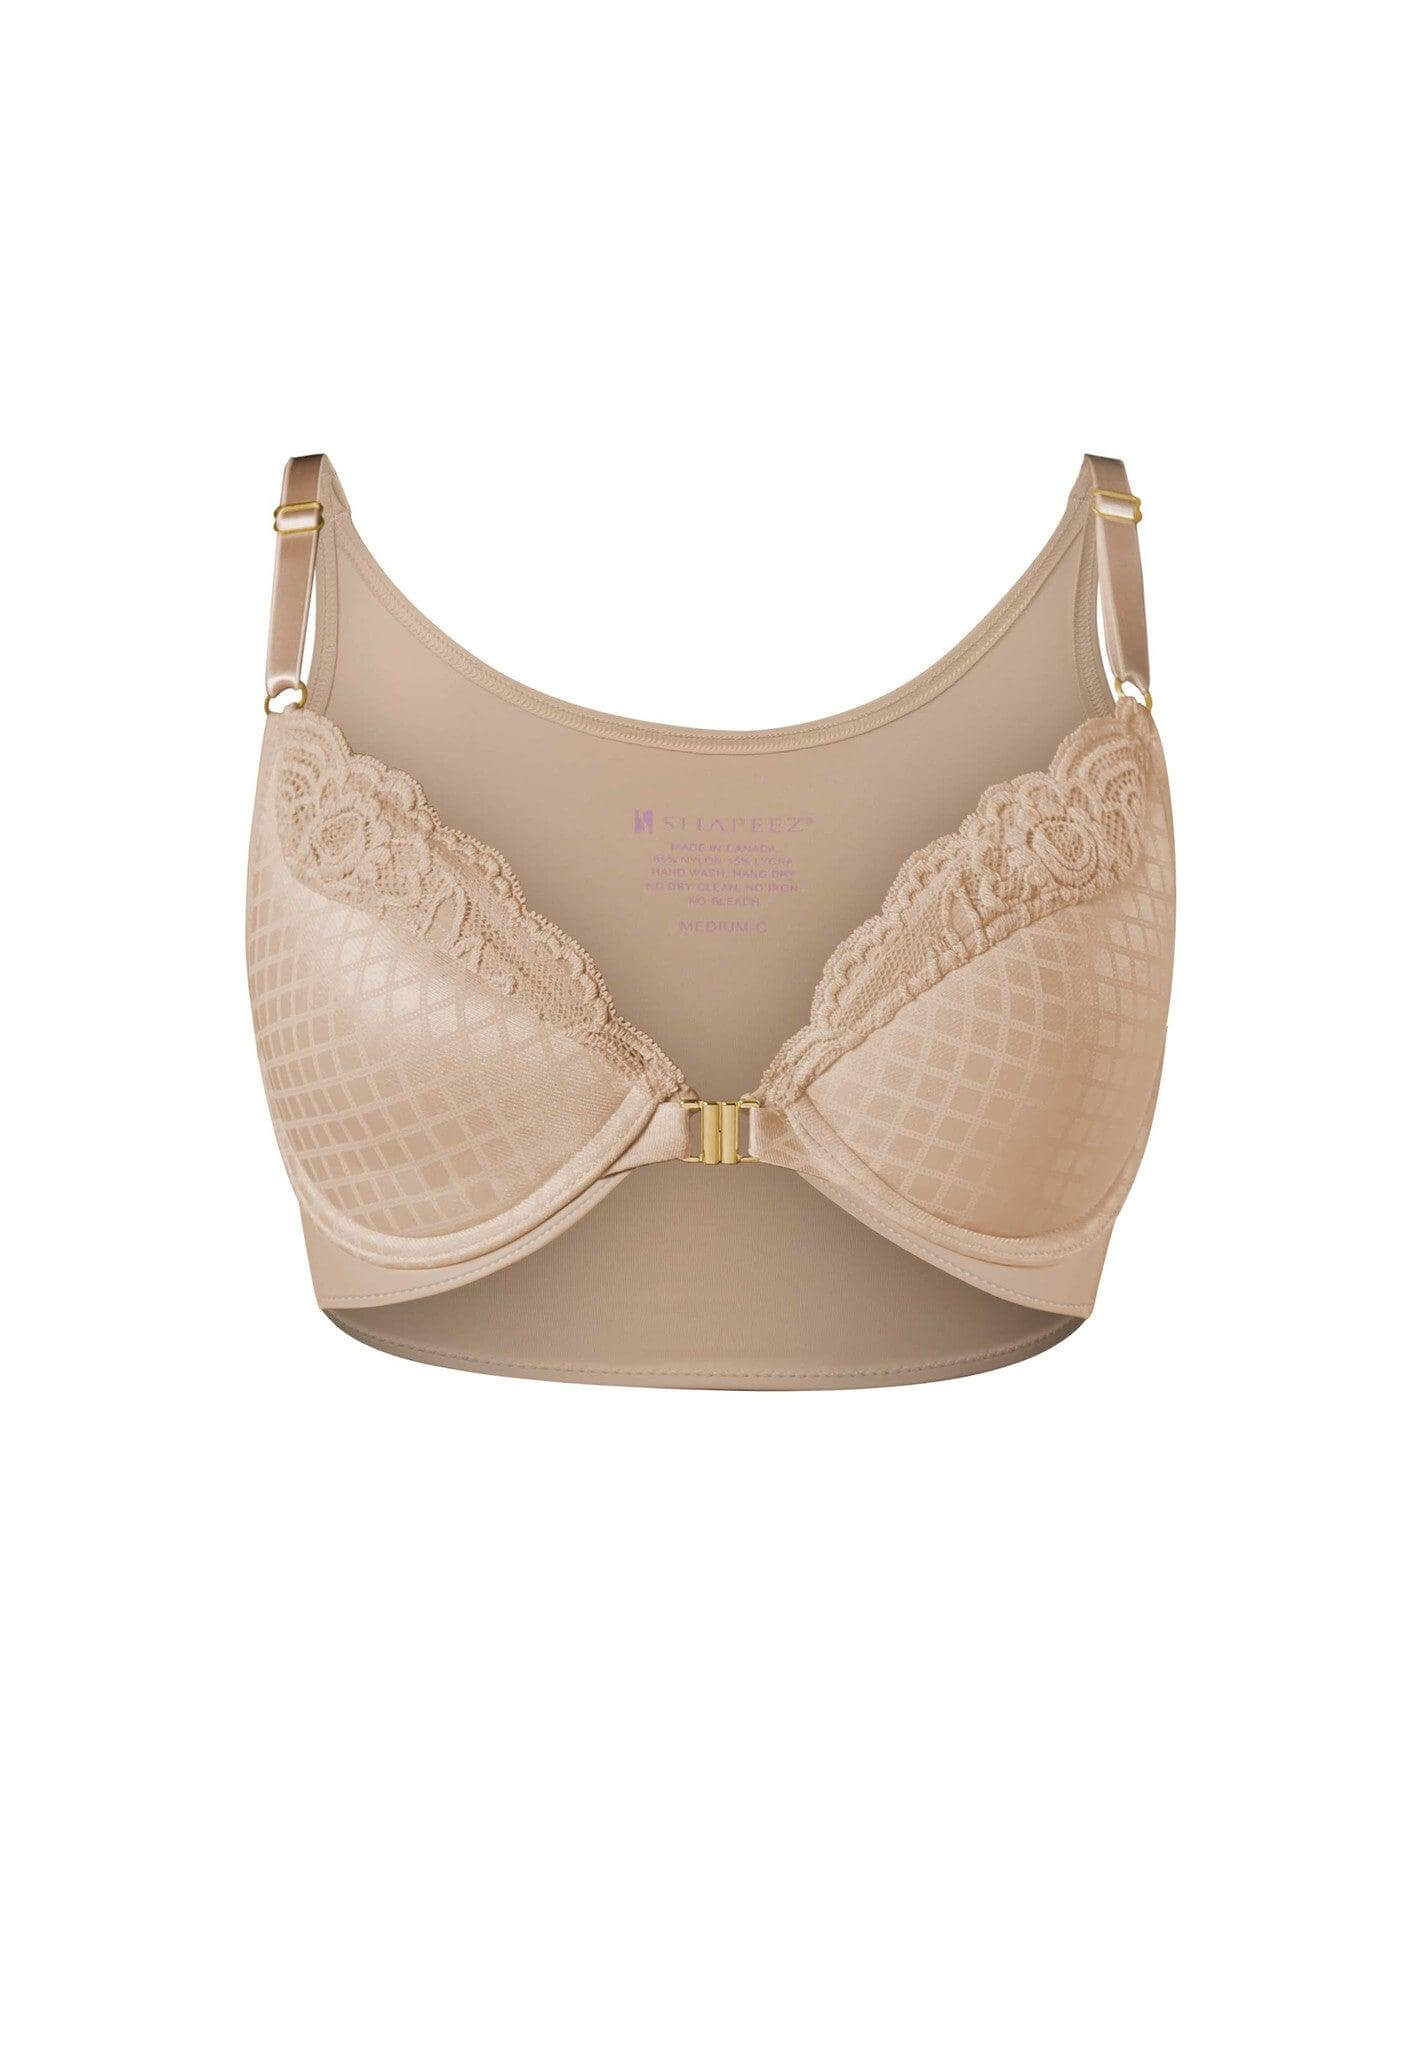 The Demee Short Front Closure Back Smoothing Push-up Bra